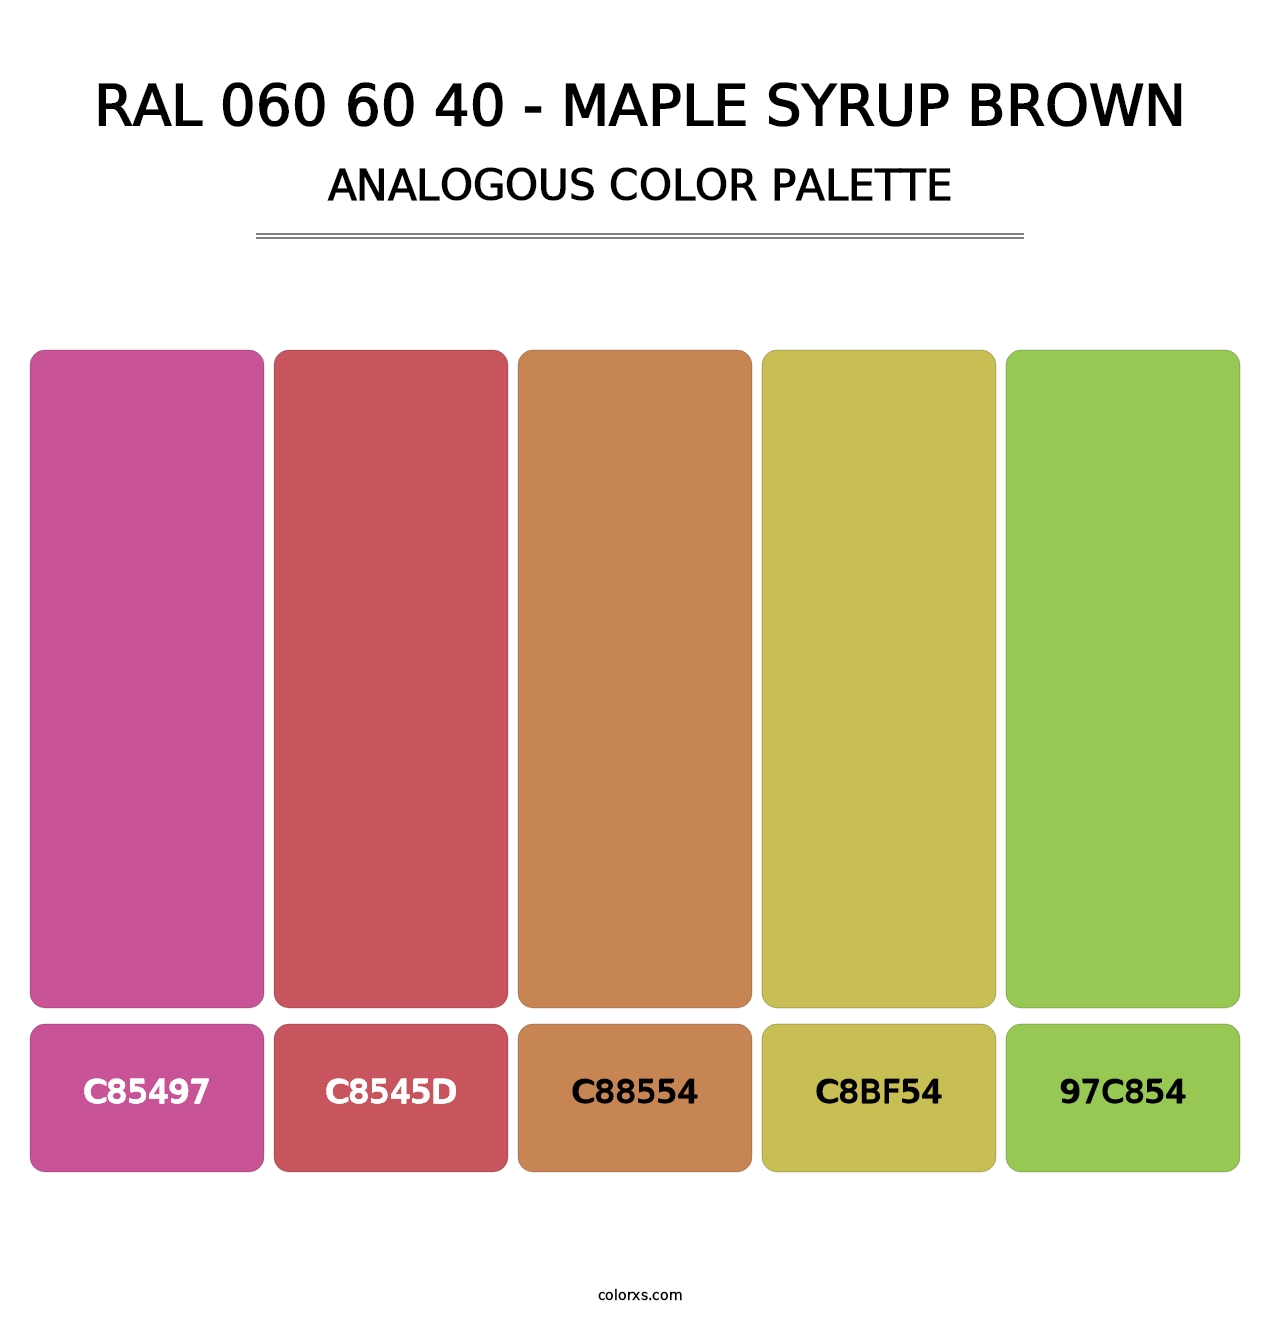 RAL 060 60 40 - Maple Syrup Brown - Analogous Color Palette